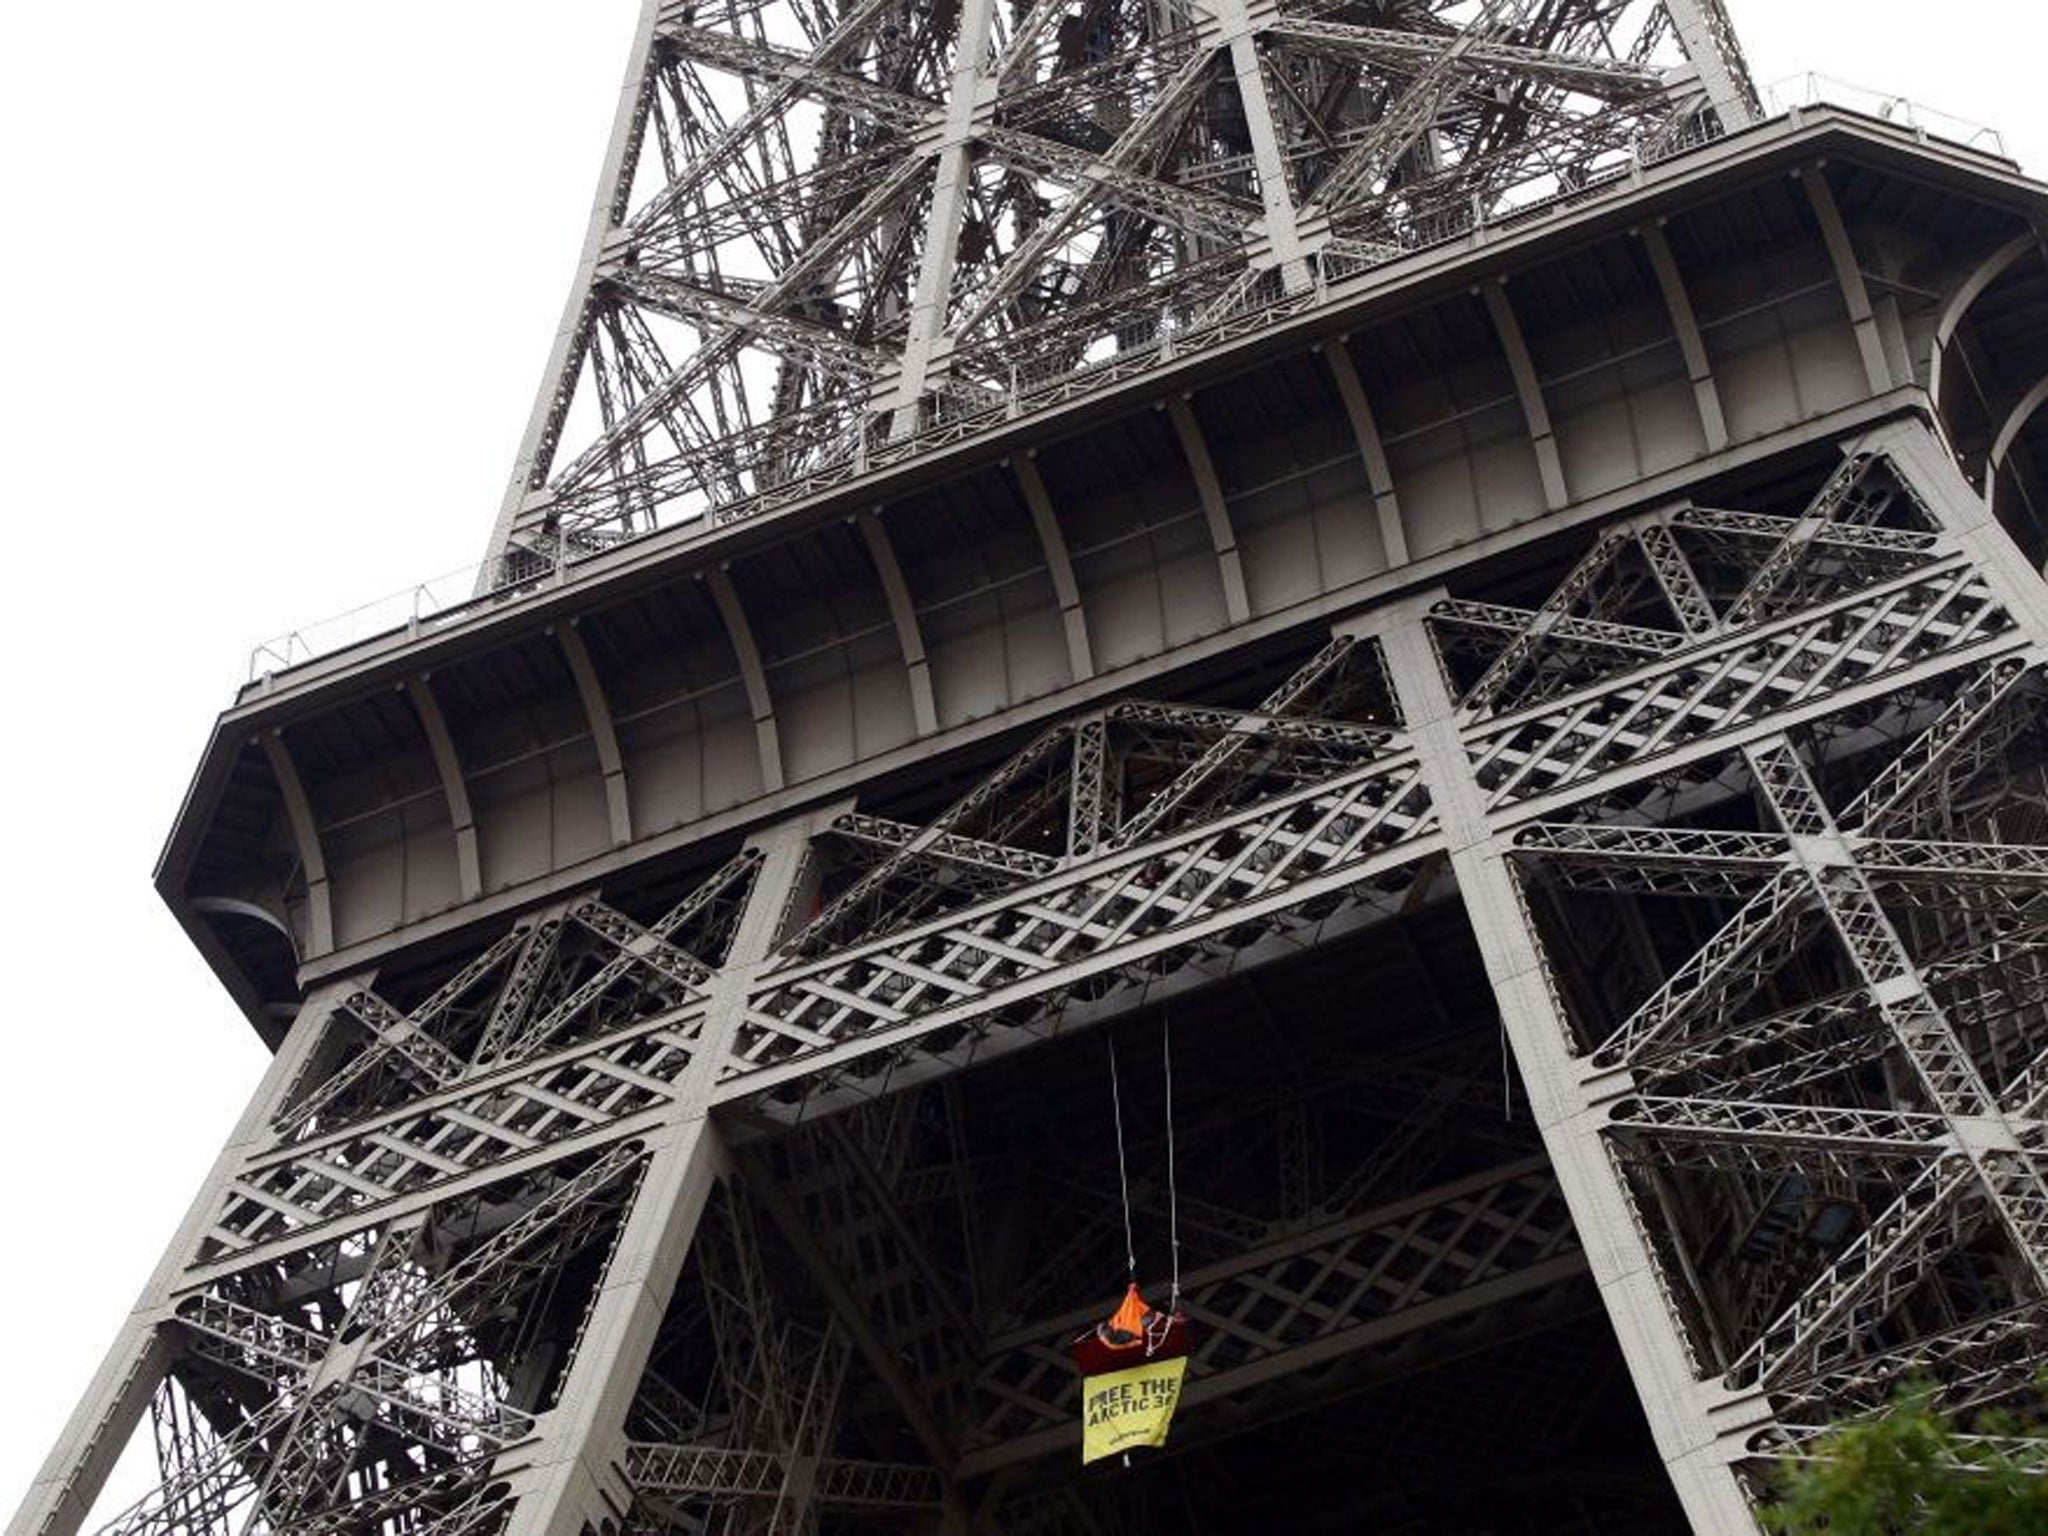 The Greenpeace banner hanging from the Eiffel Tower today